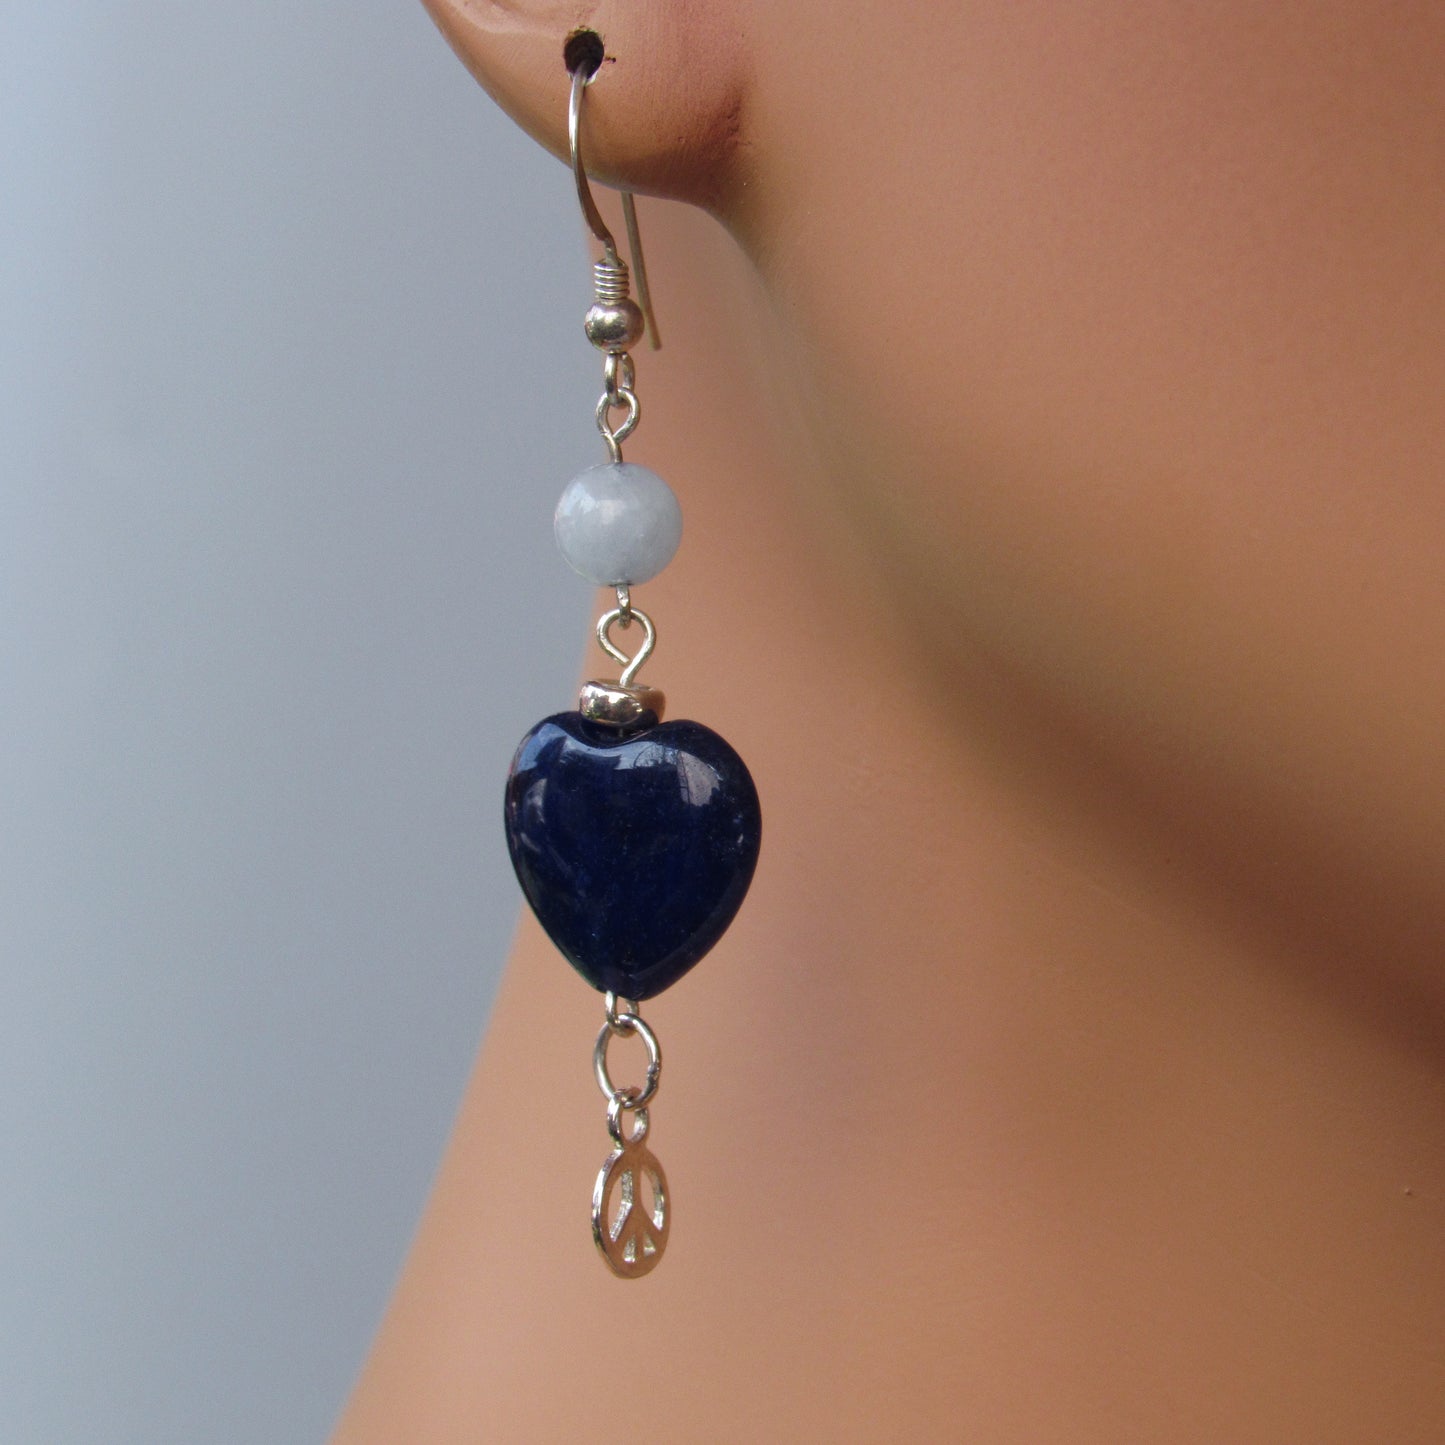 Blue Agate gemstone Hearts, Sterling Silver Peace Signs, Aquamarine, Sterling Silver Drop Earrings